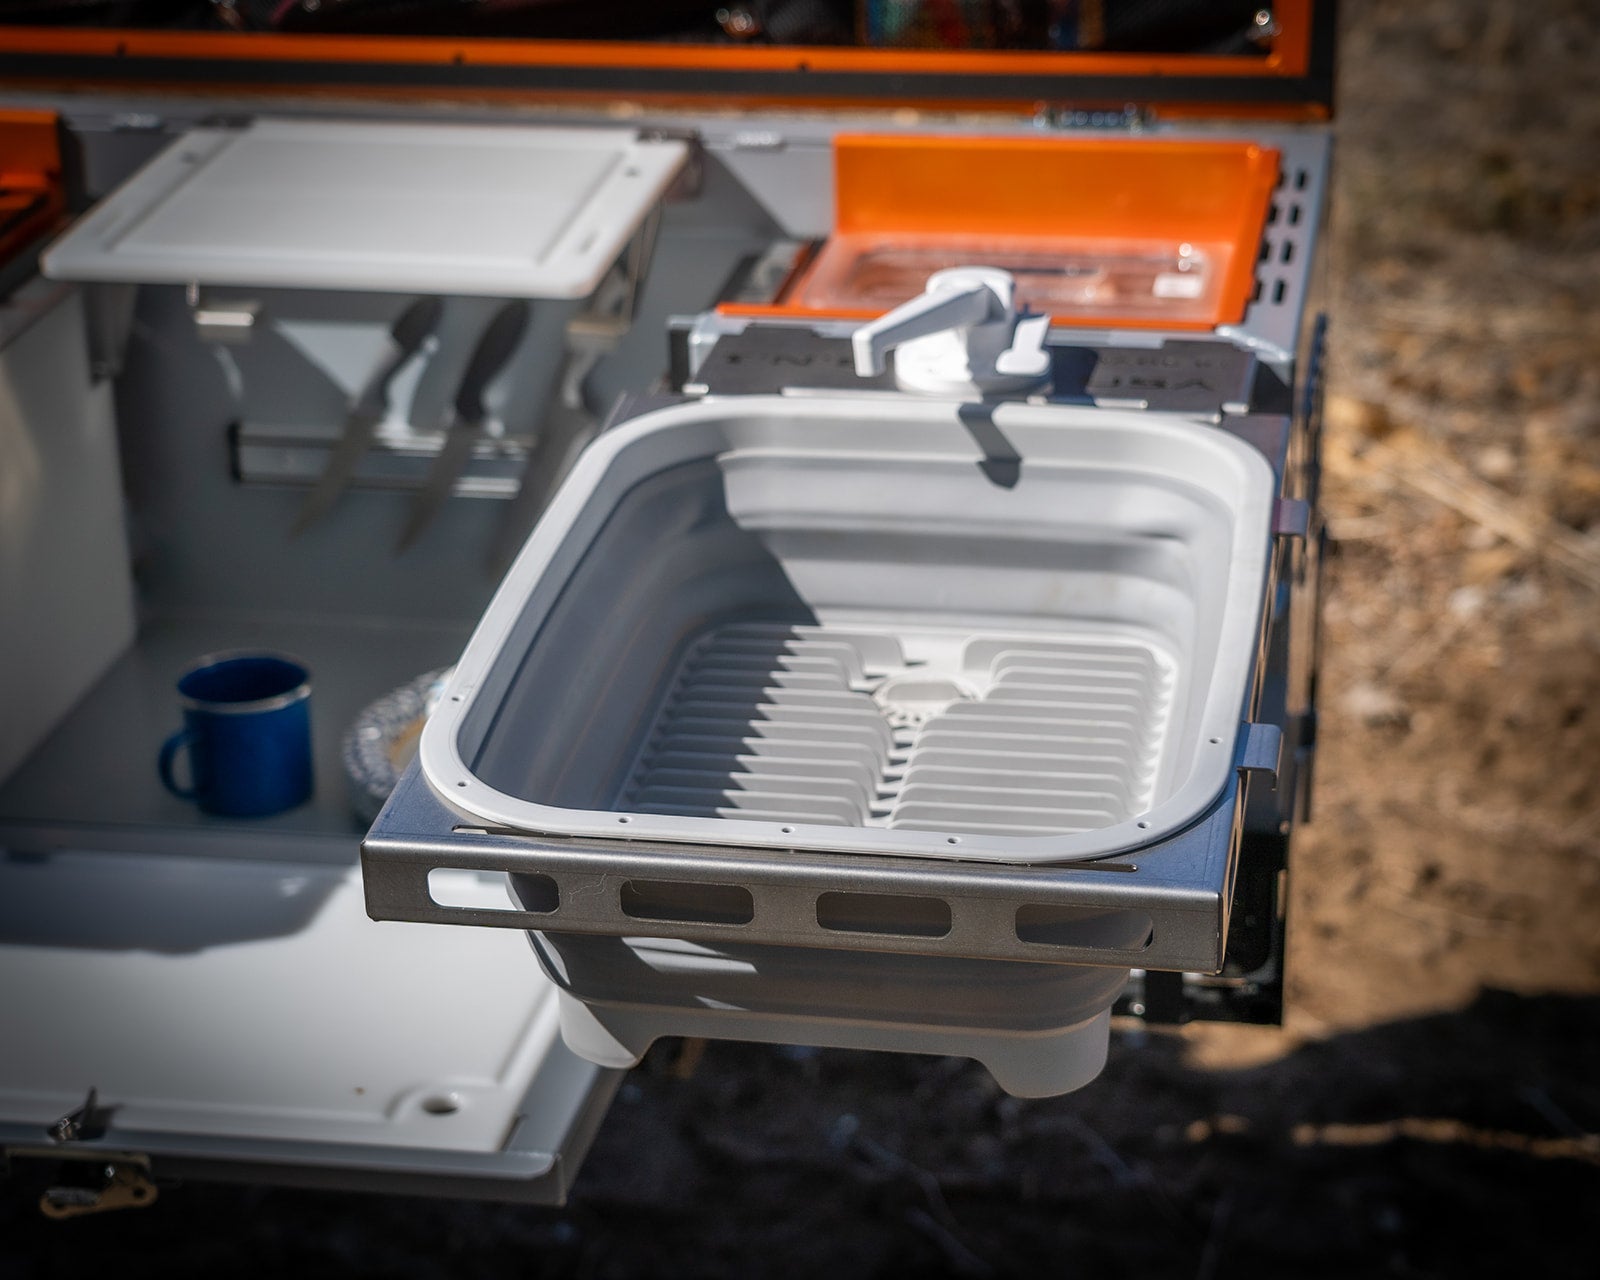 Tailgate Sink with running water can be used at any location